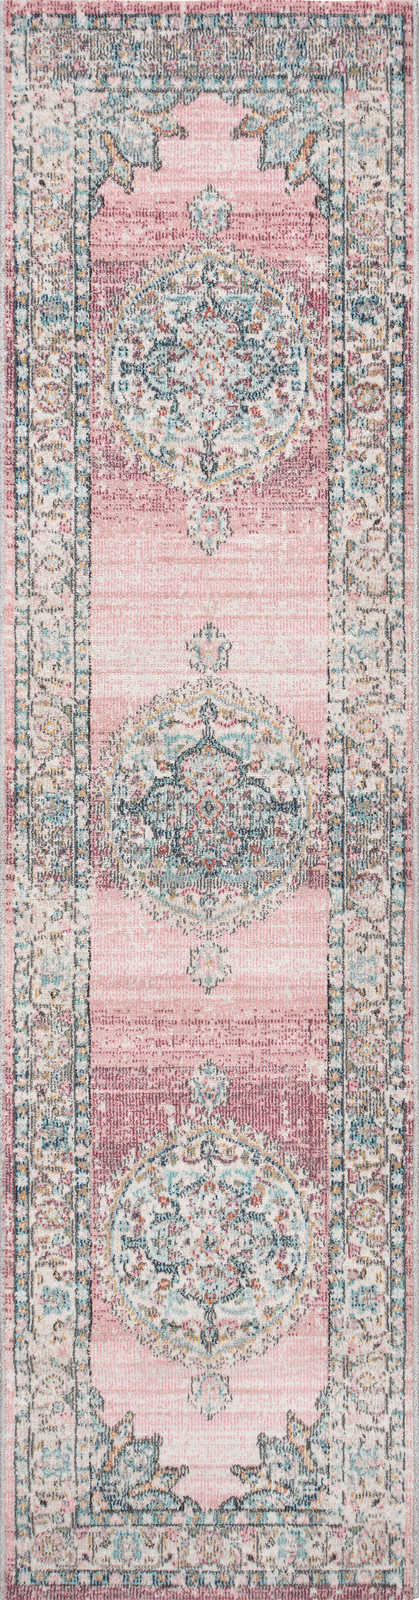             Flatweave Carpet with Pink Accents as Runner - 300 x 80 cm
        